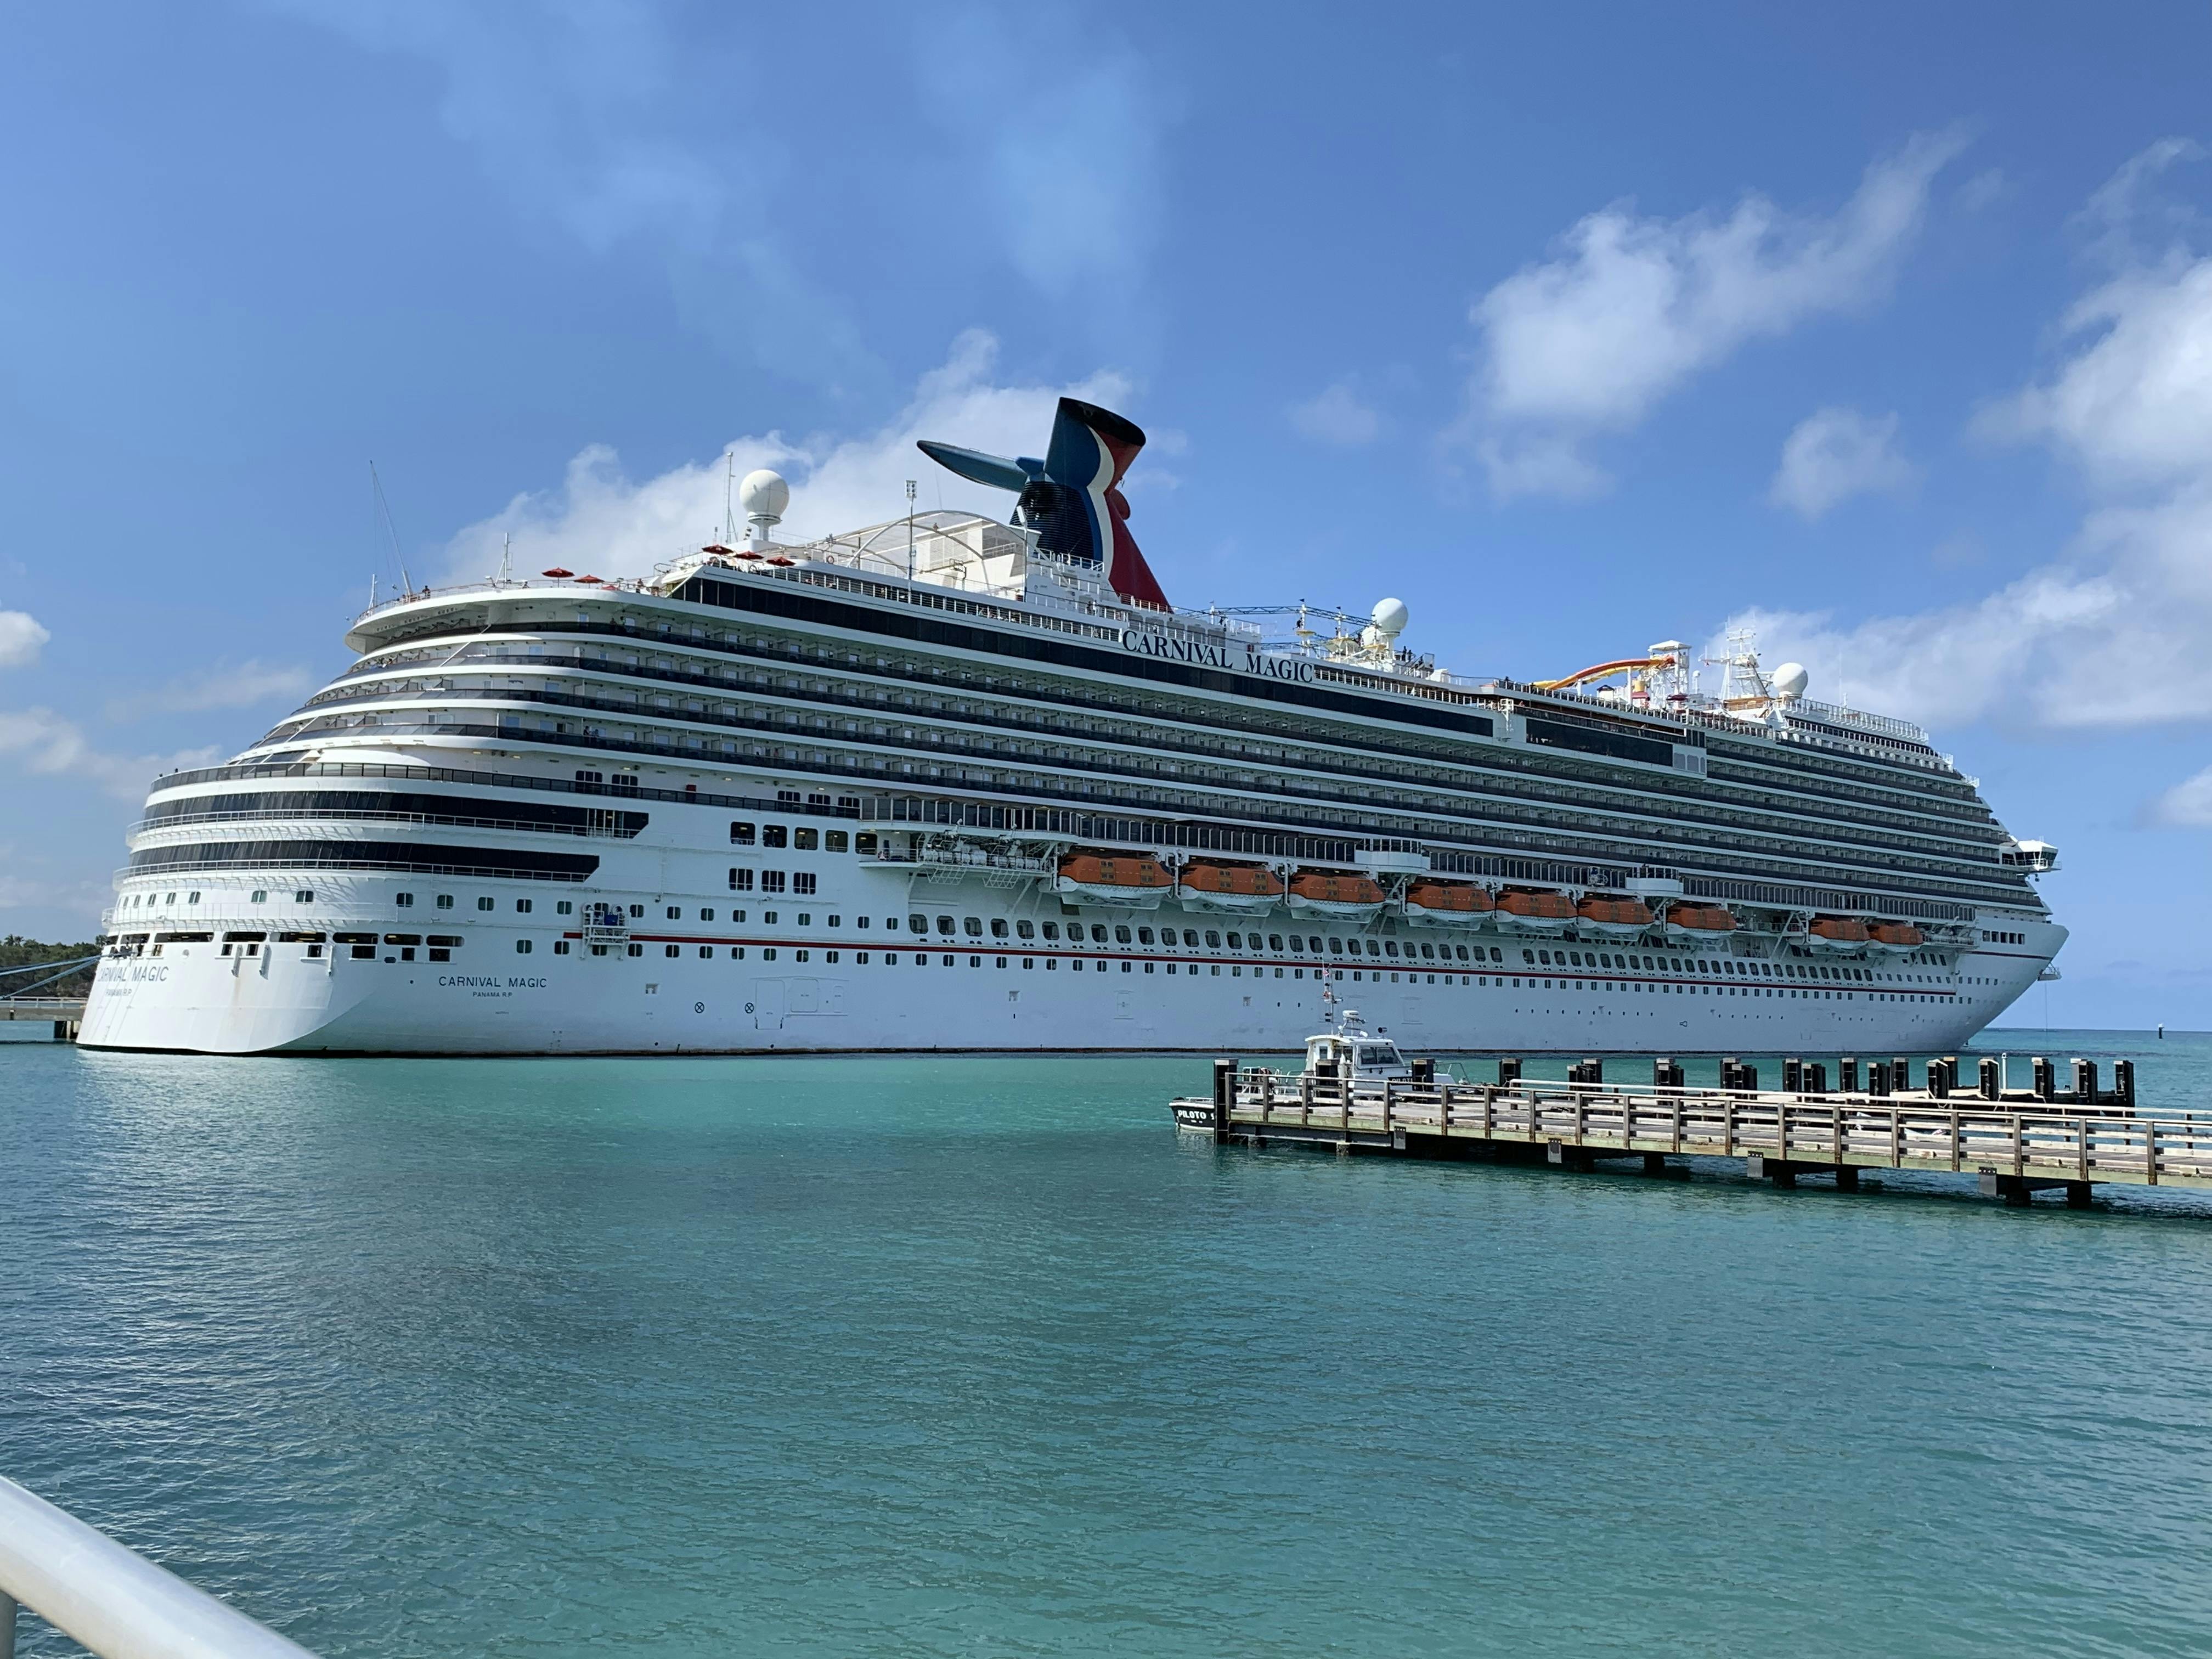 Carnival Magic Cruise Review by KrisMark99 March 24, 2019